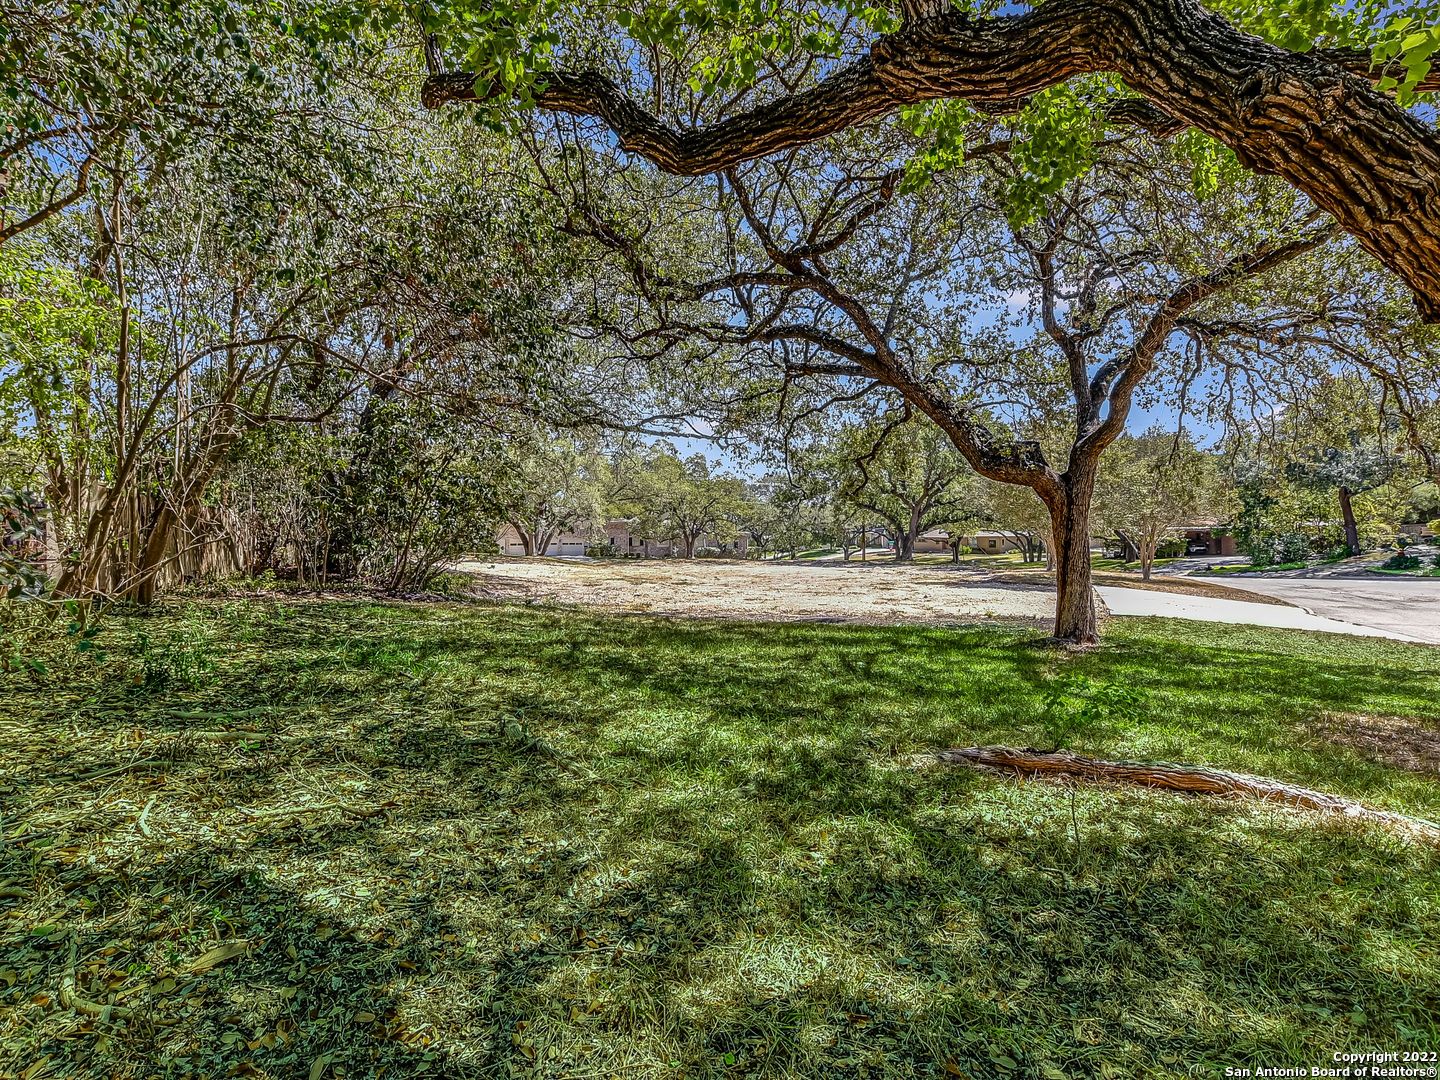 Now listed is the perfect lot ready for your clients to build their dream house. In Terrell Hills on a tree-lined street, this .67 acre lot is cleared and perfectly priced for the current market. There are majestic Oak trees scattered in a beautiful pattern across the property, and the corner lot location provides supreme privacy. Centrally located in San Antonio and in very close proximity to the SA Airport, major shopping area, The Pearl, downtown, and significant freeways.